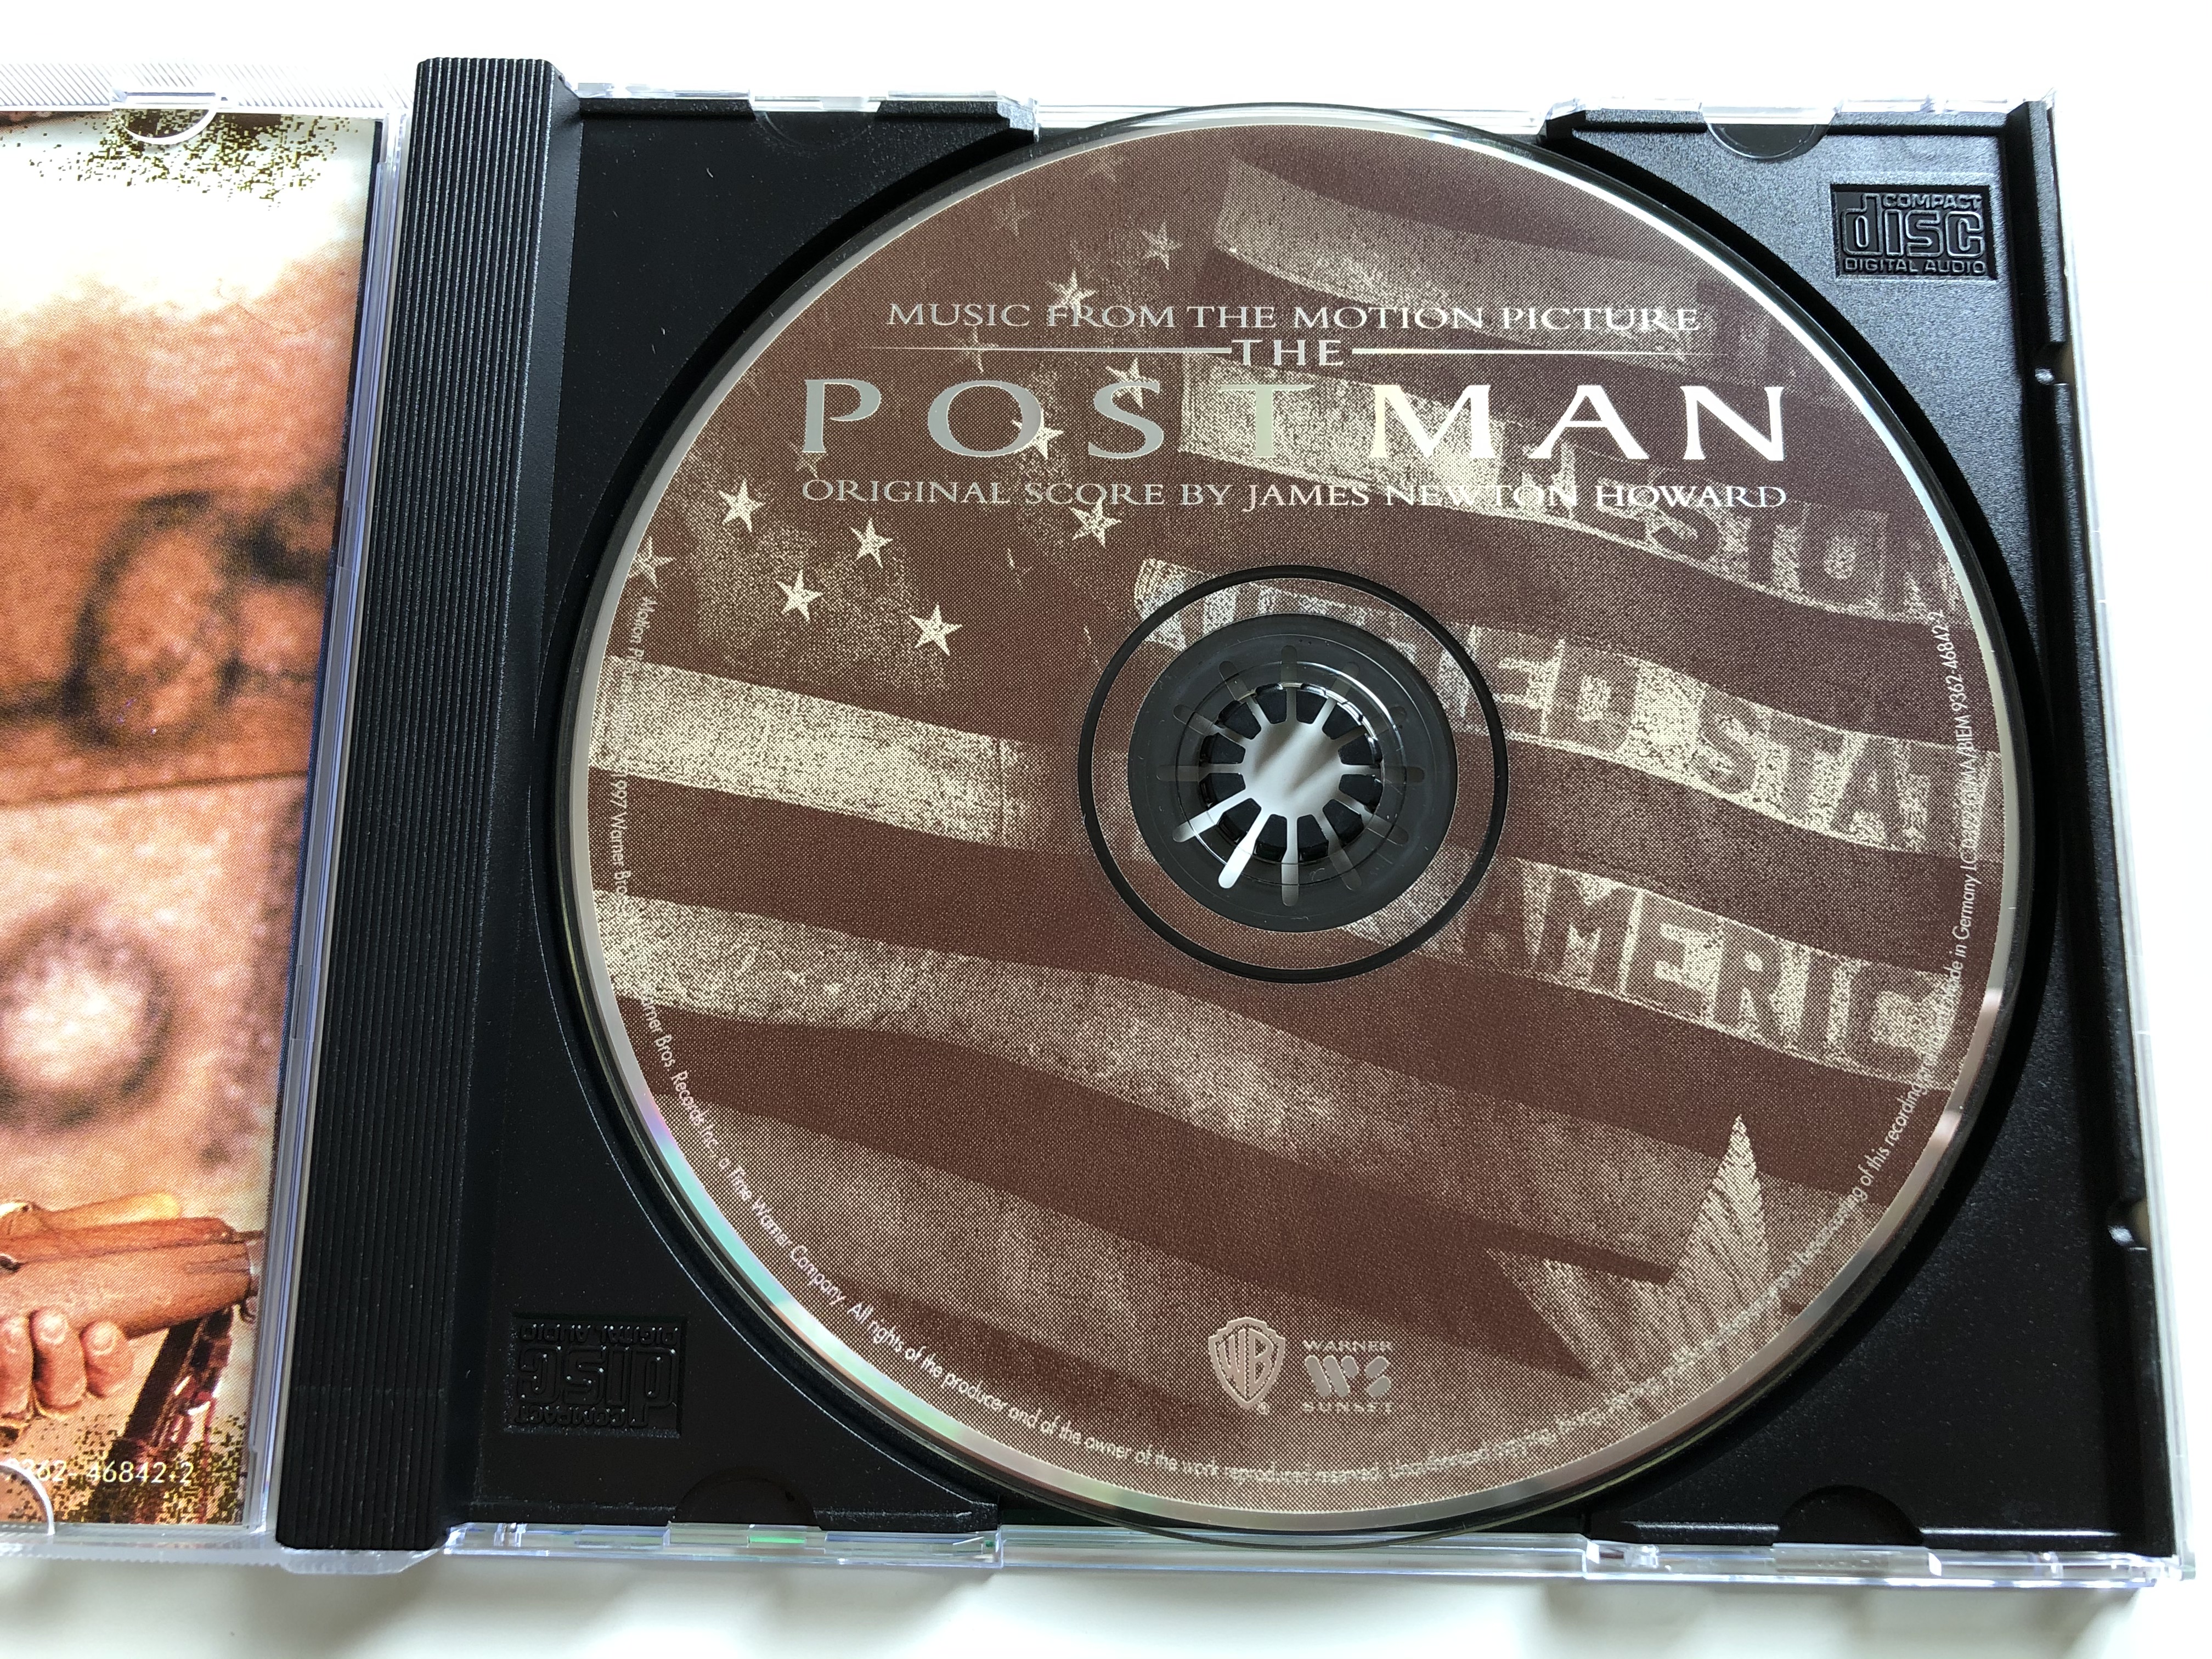 music-from-the-motion-picture-the-postman-original-score-by-james-newton-howard-warner-bros.-records-audio-cd-1997-9362-46842-2-5-.jpg